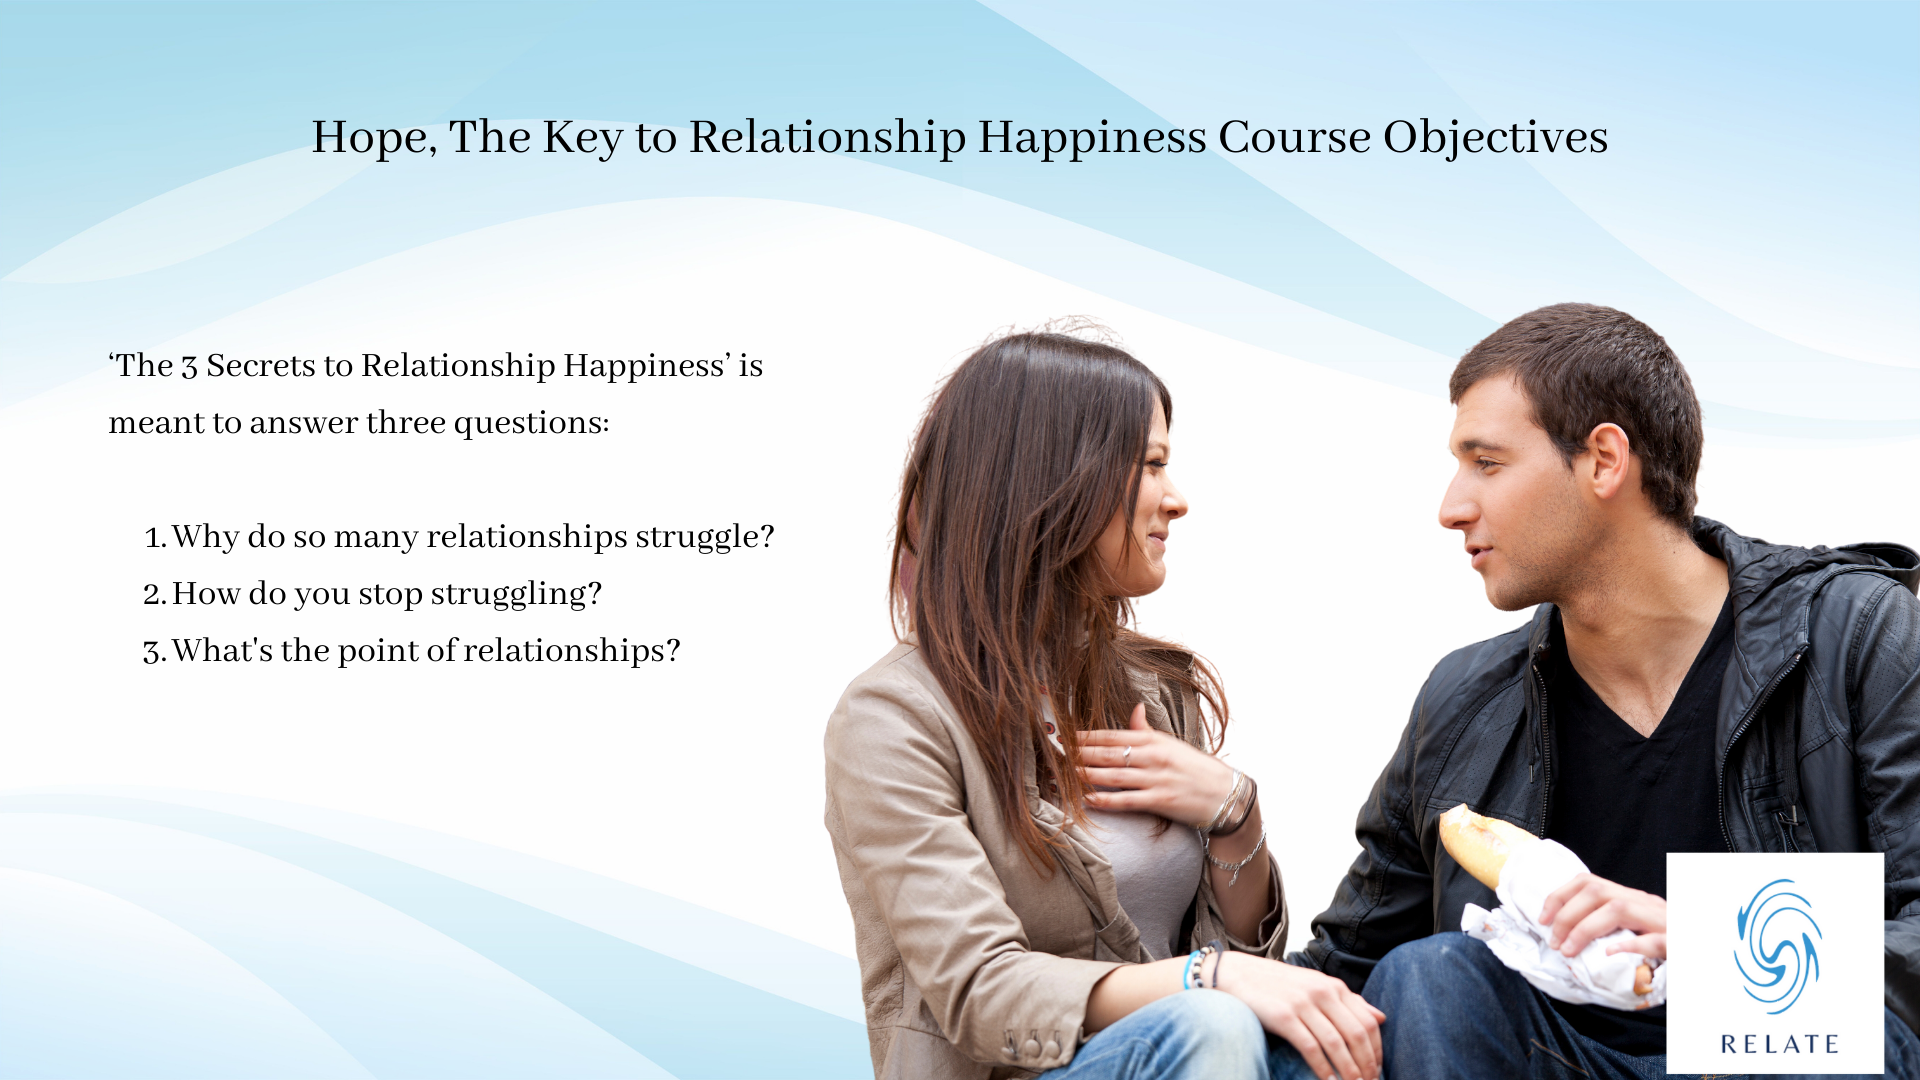 Hope - The Key to Relationship Happiness